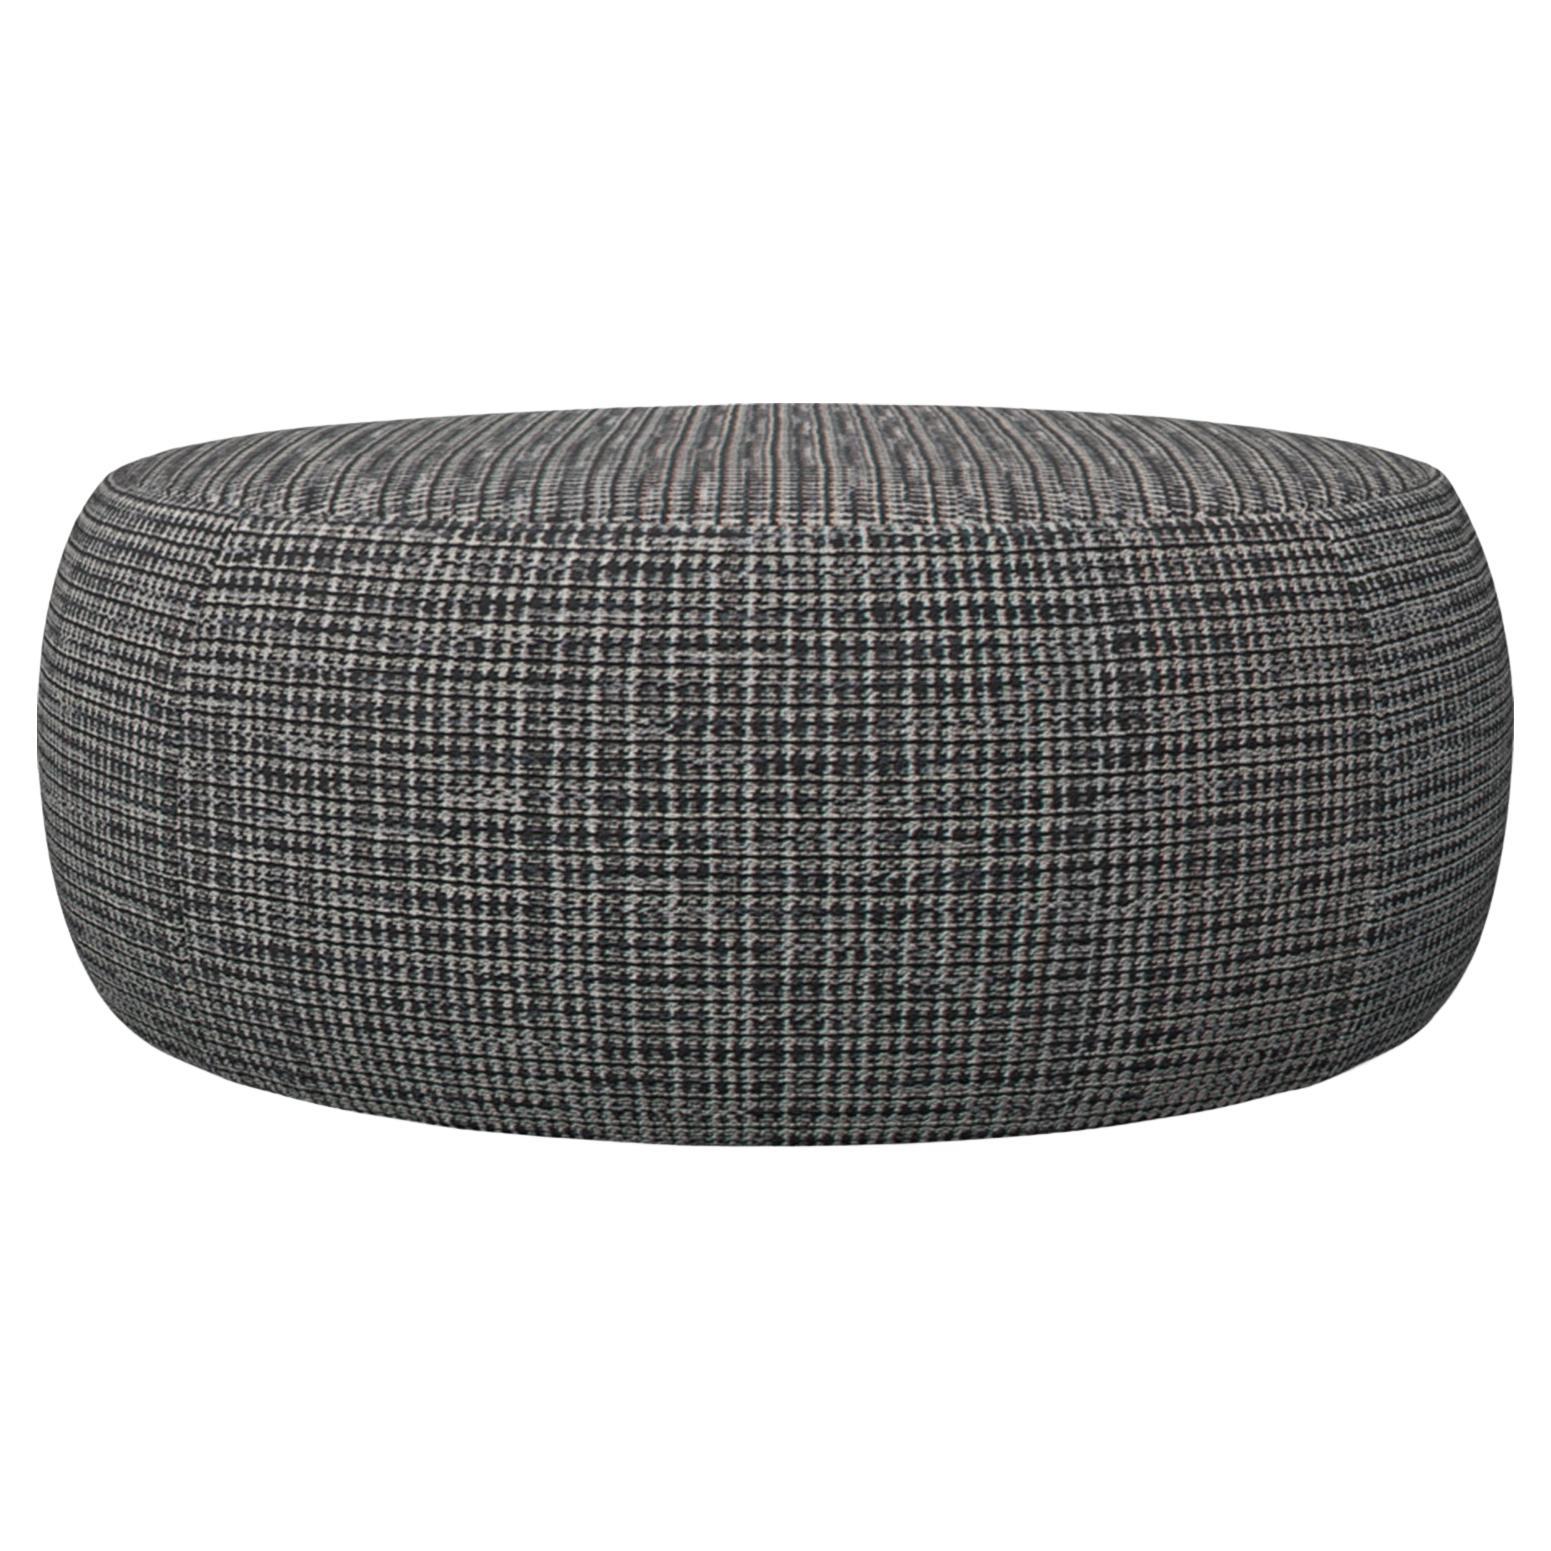 Moooi Pooof Large Pouf in Boucle, Black and White Upholstery